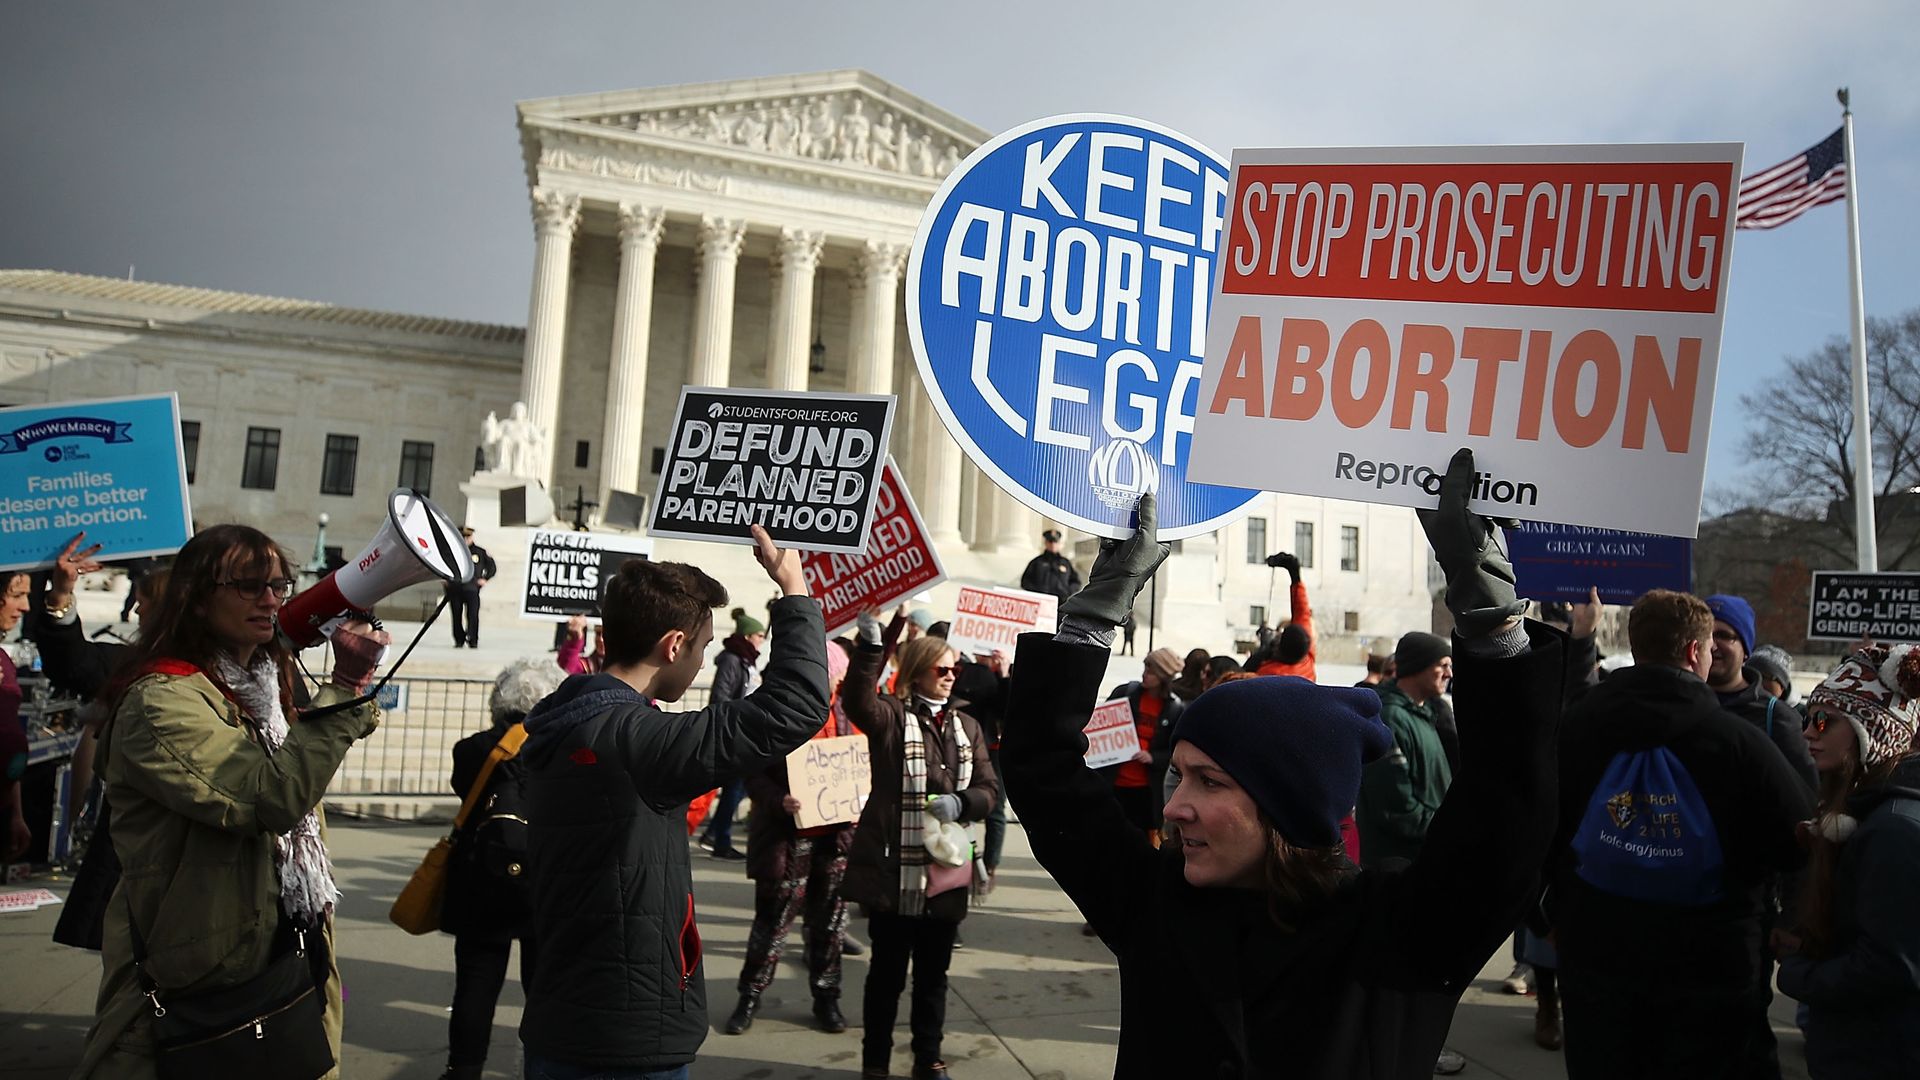 Supporters of legal access to abortion, as well as anti-abortion activists, rally outside the Supreme Court. 